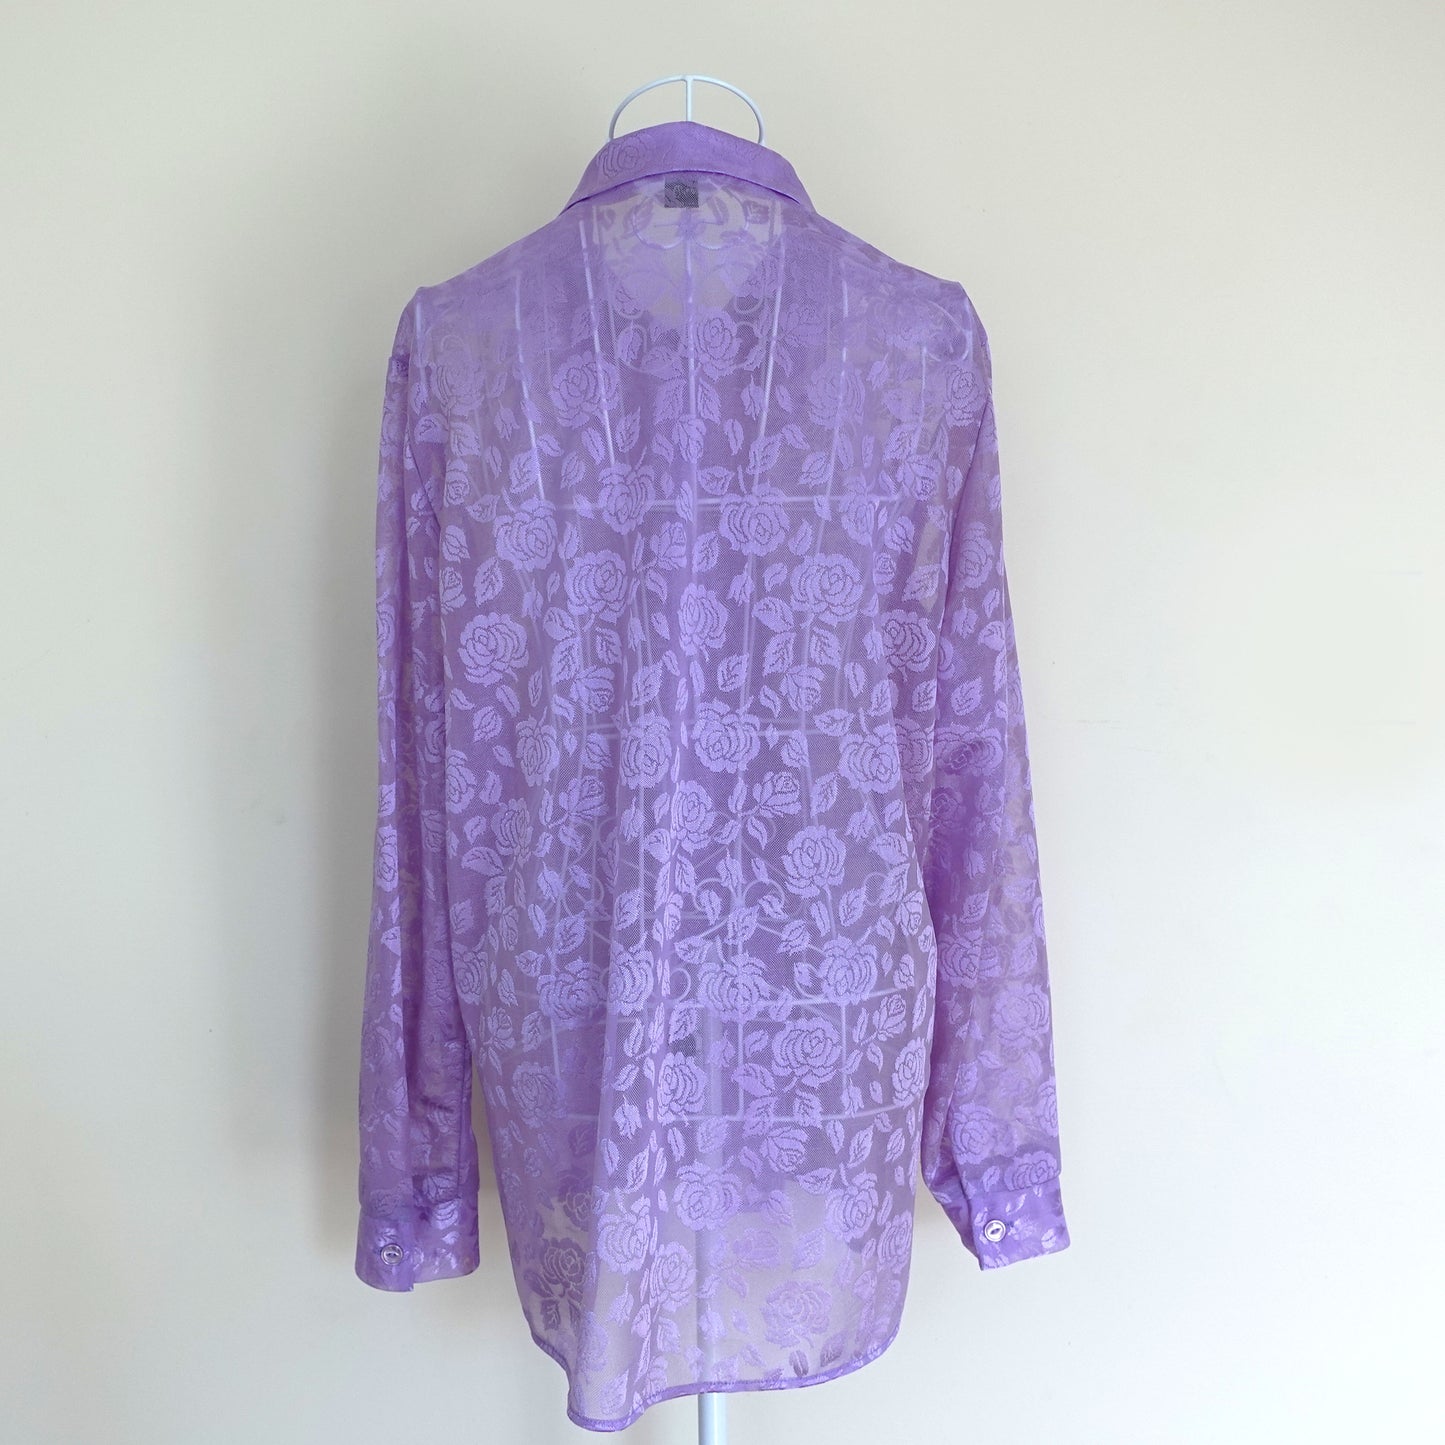 purple sheer floral button down top